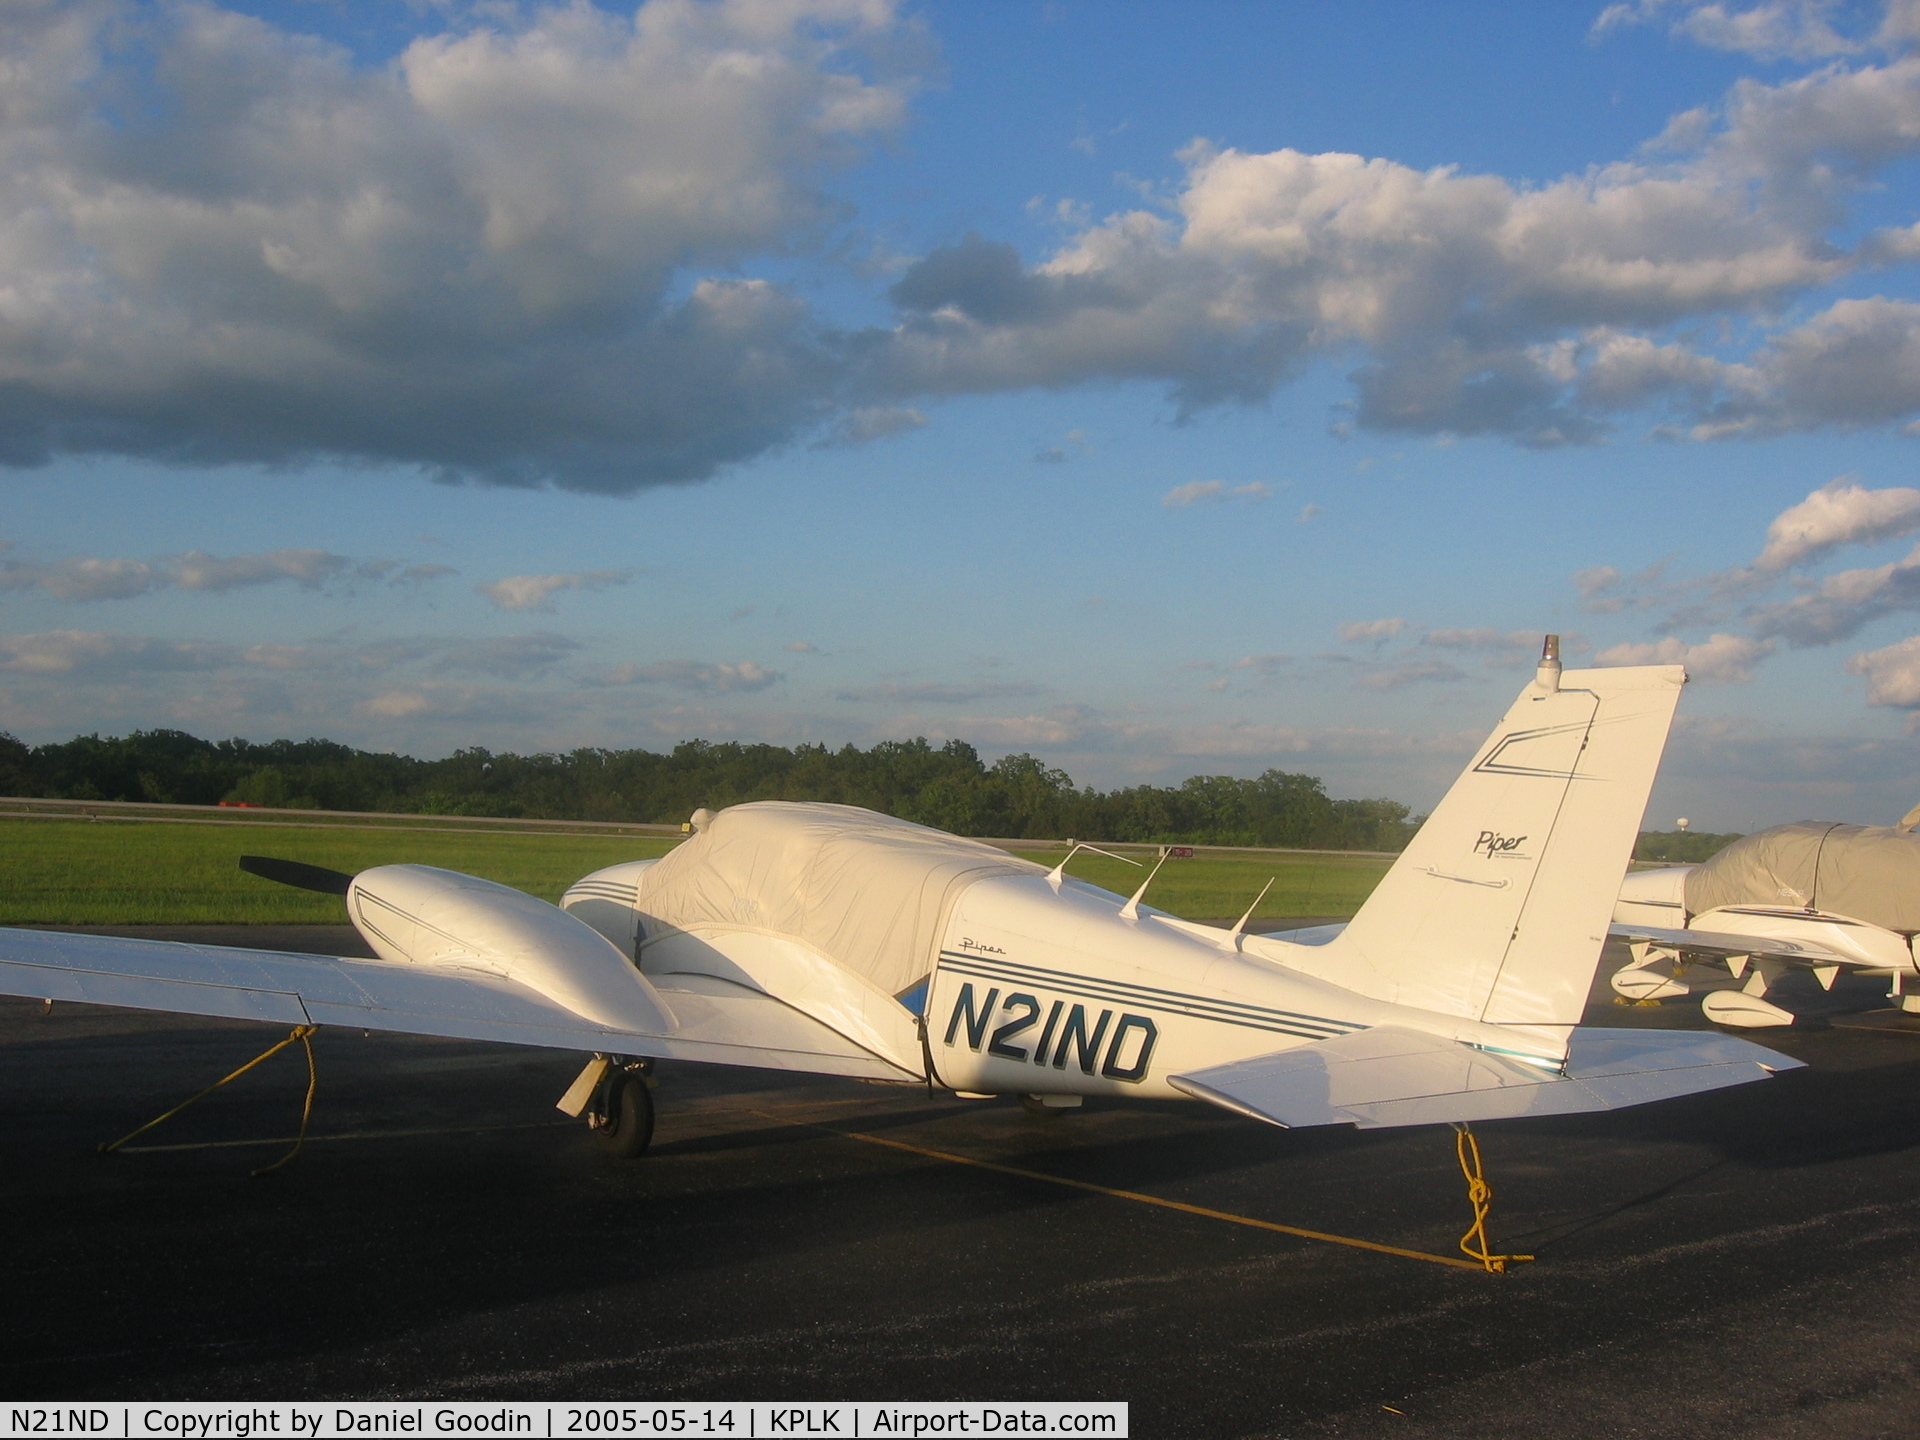 N21ND, 1963 Piper PA-30 Twin Comanche C/N 30-86, Tied down at Point Lookout, Missouri